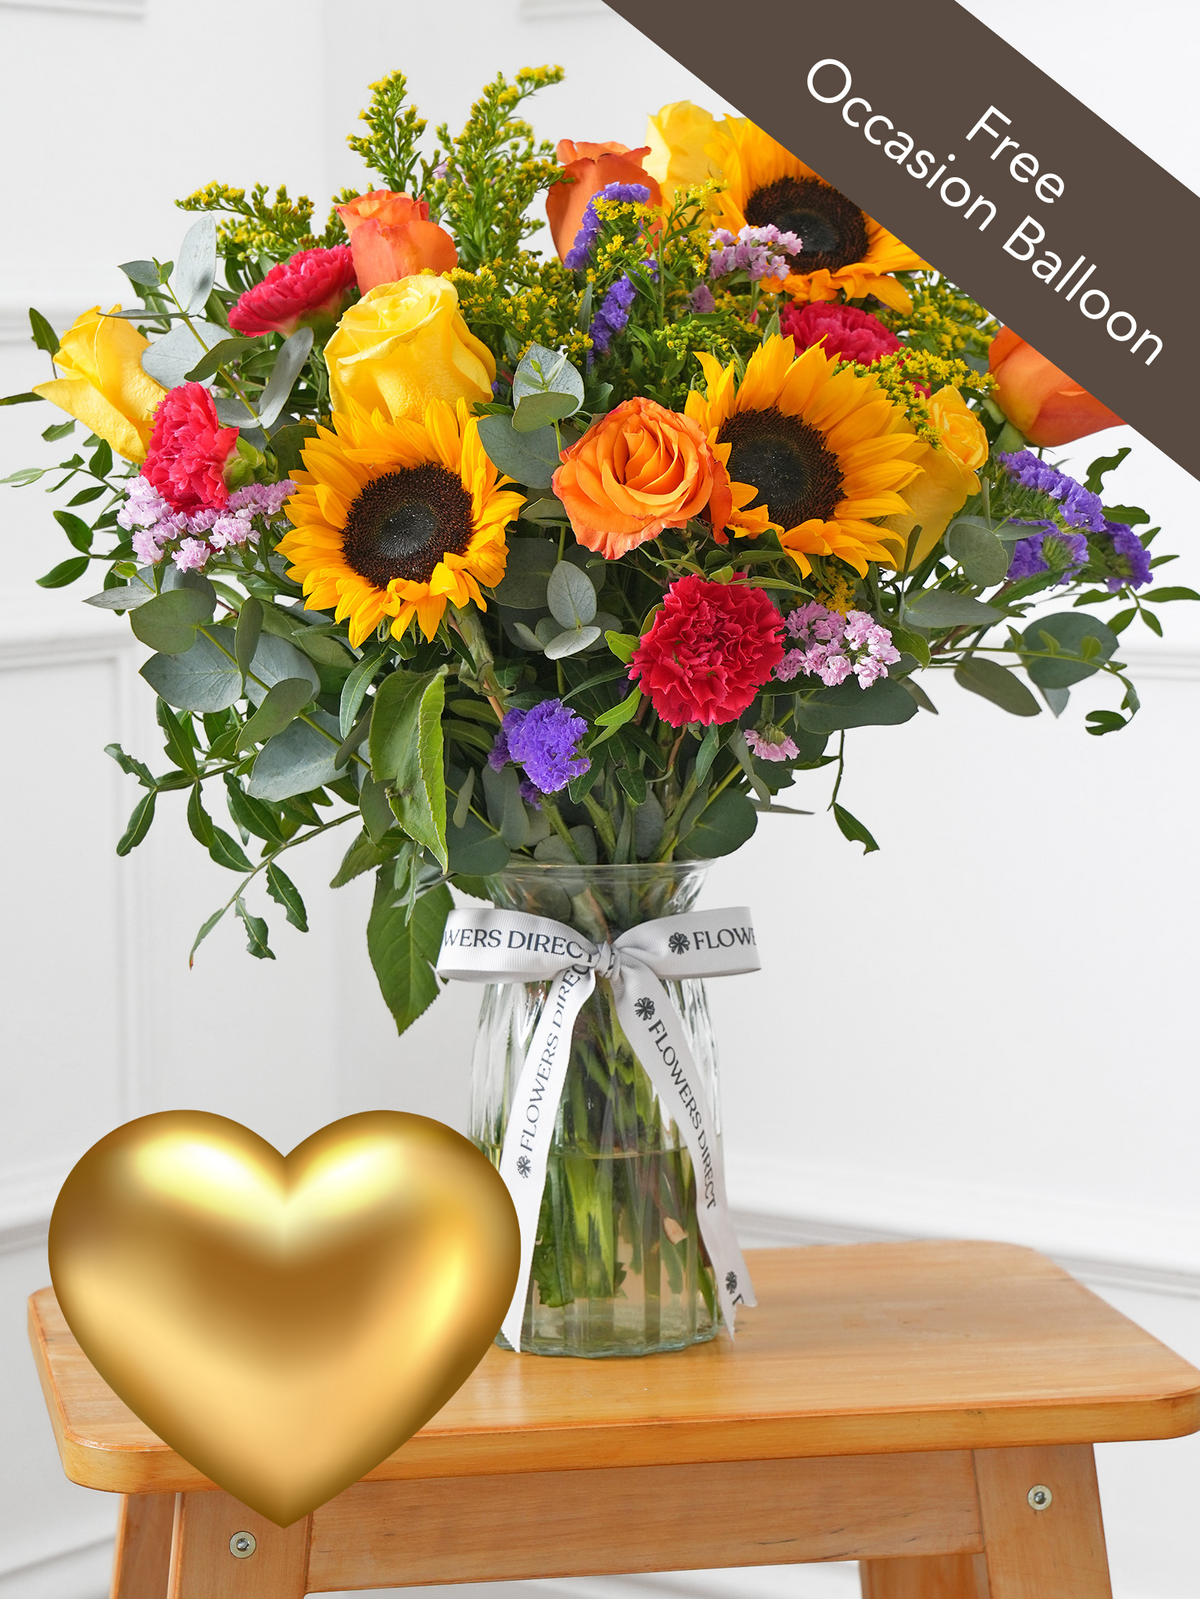 Colour Burst - Vase with Free Balloon to Match the Occasion